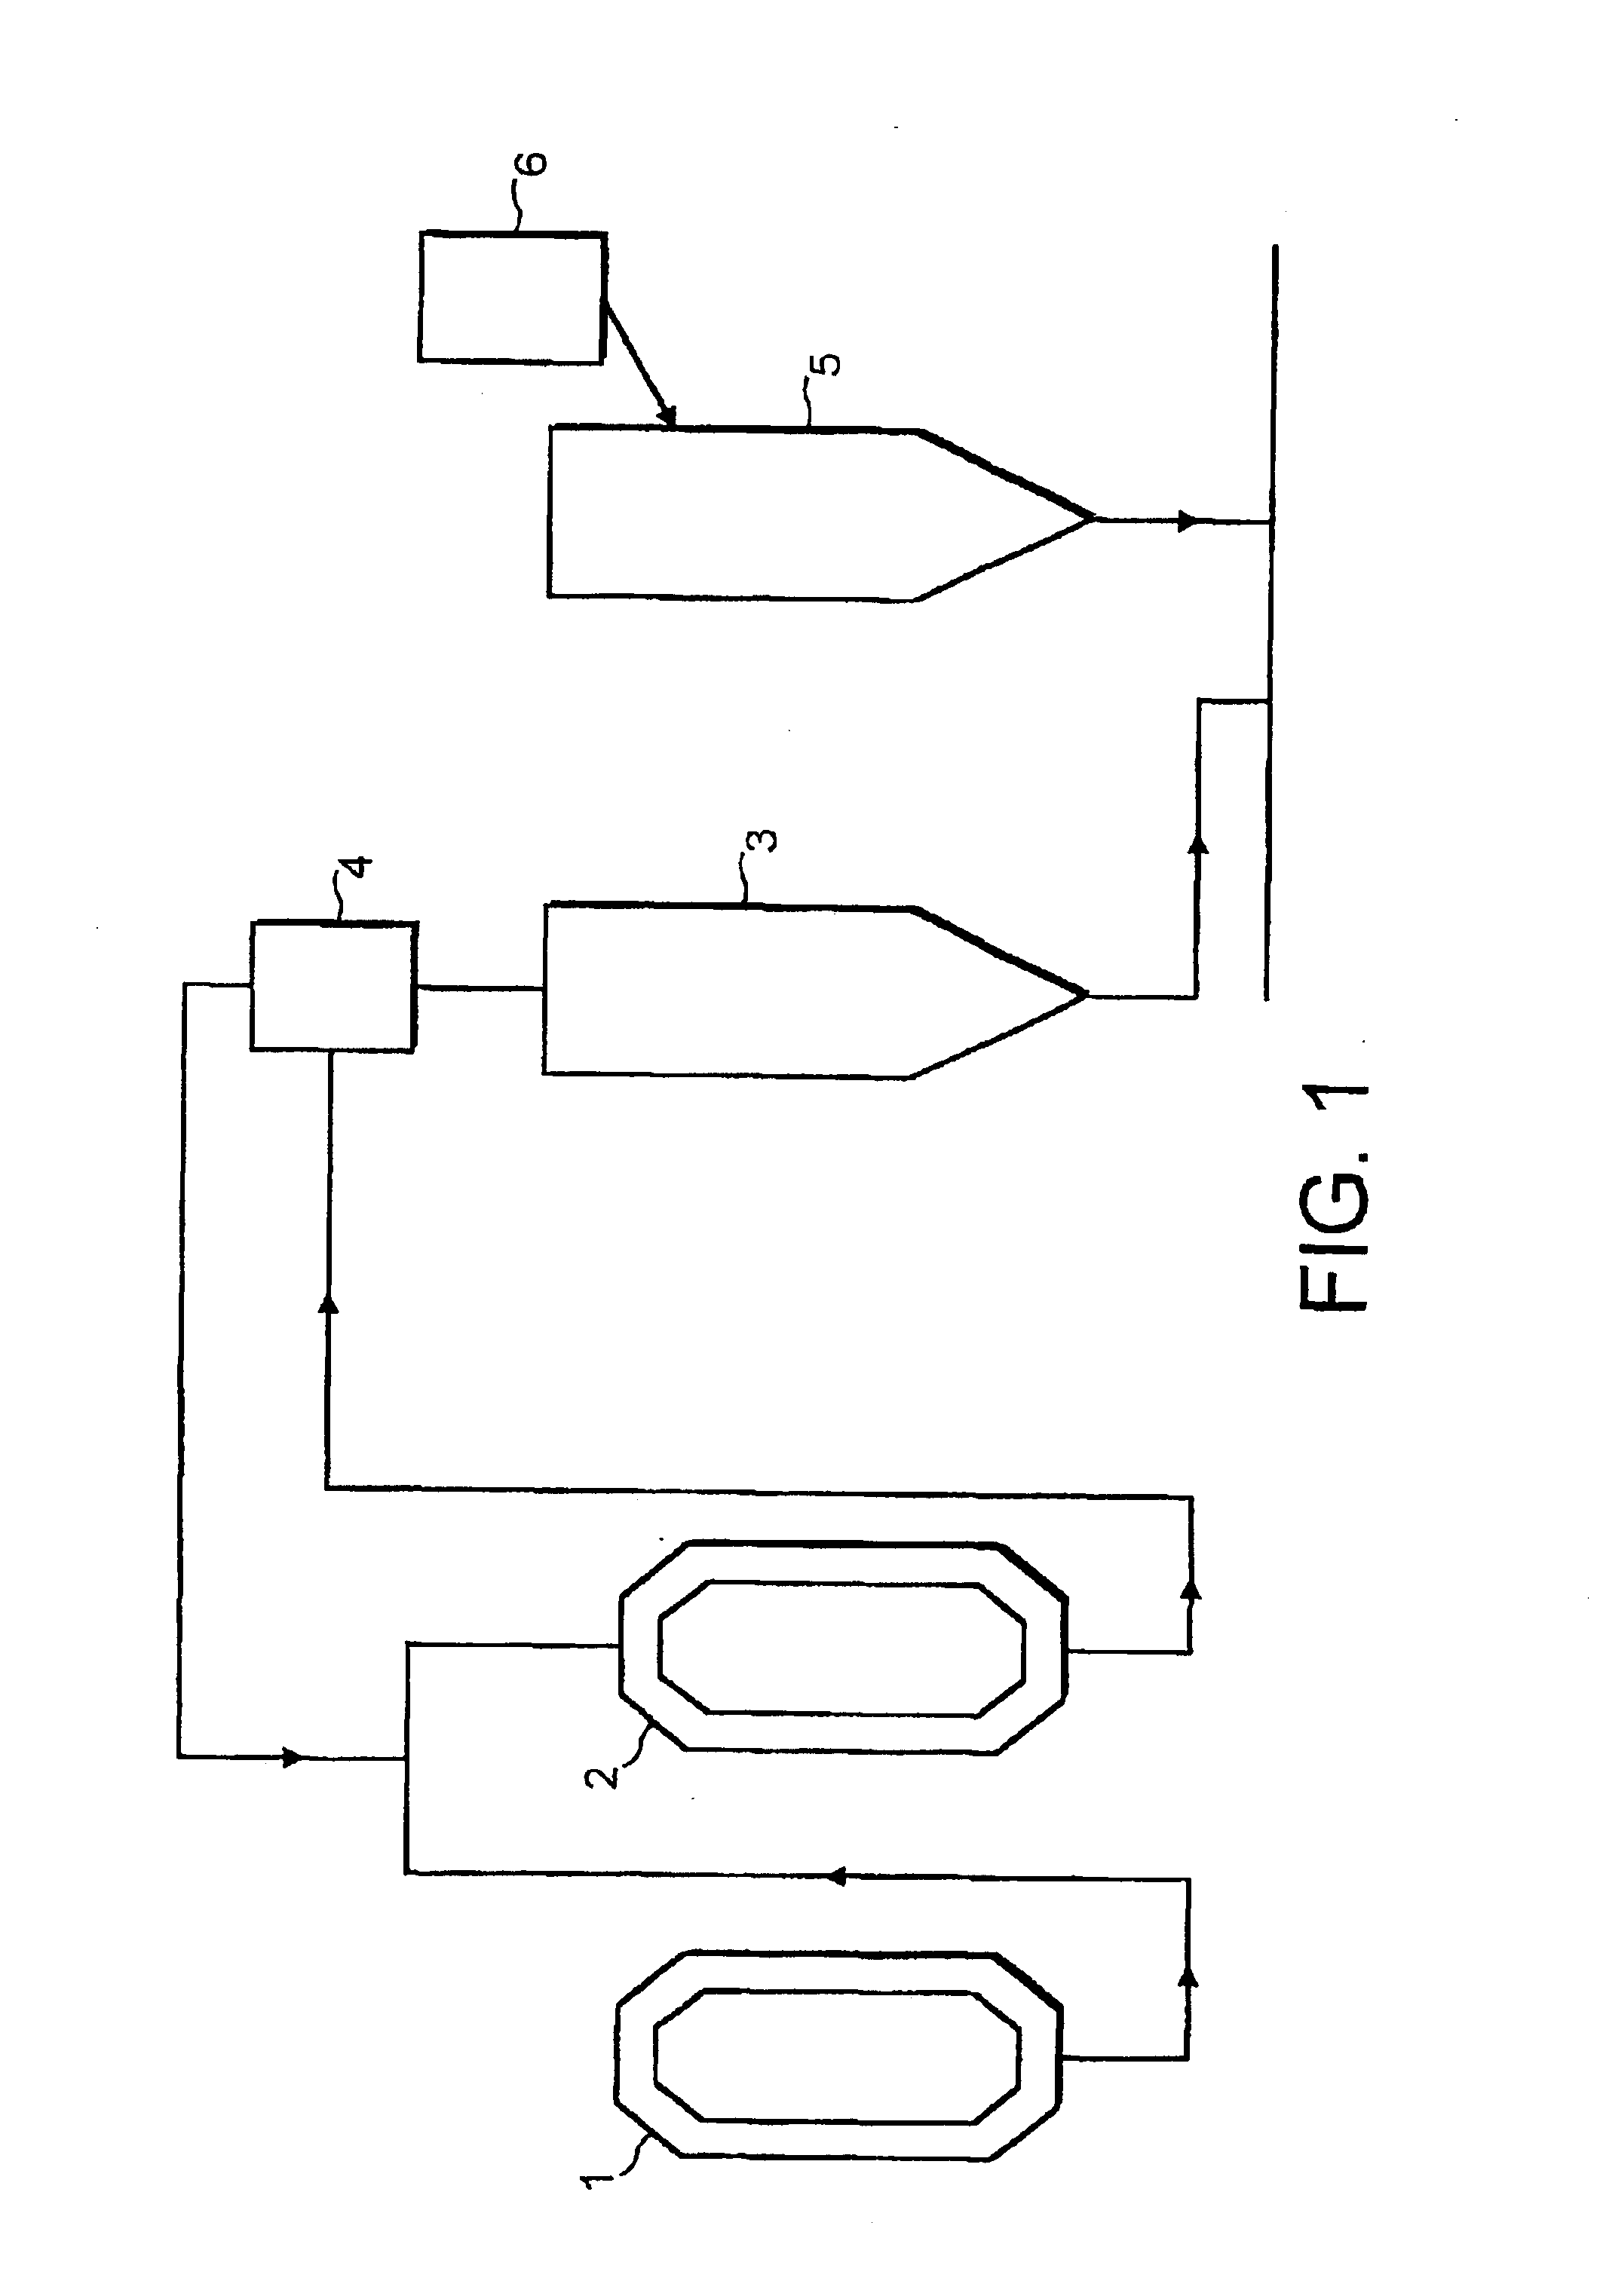 Process for producing propylene based polymer compositions